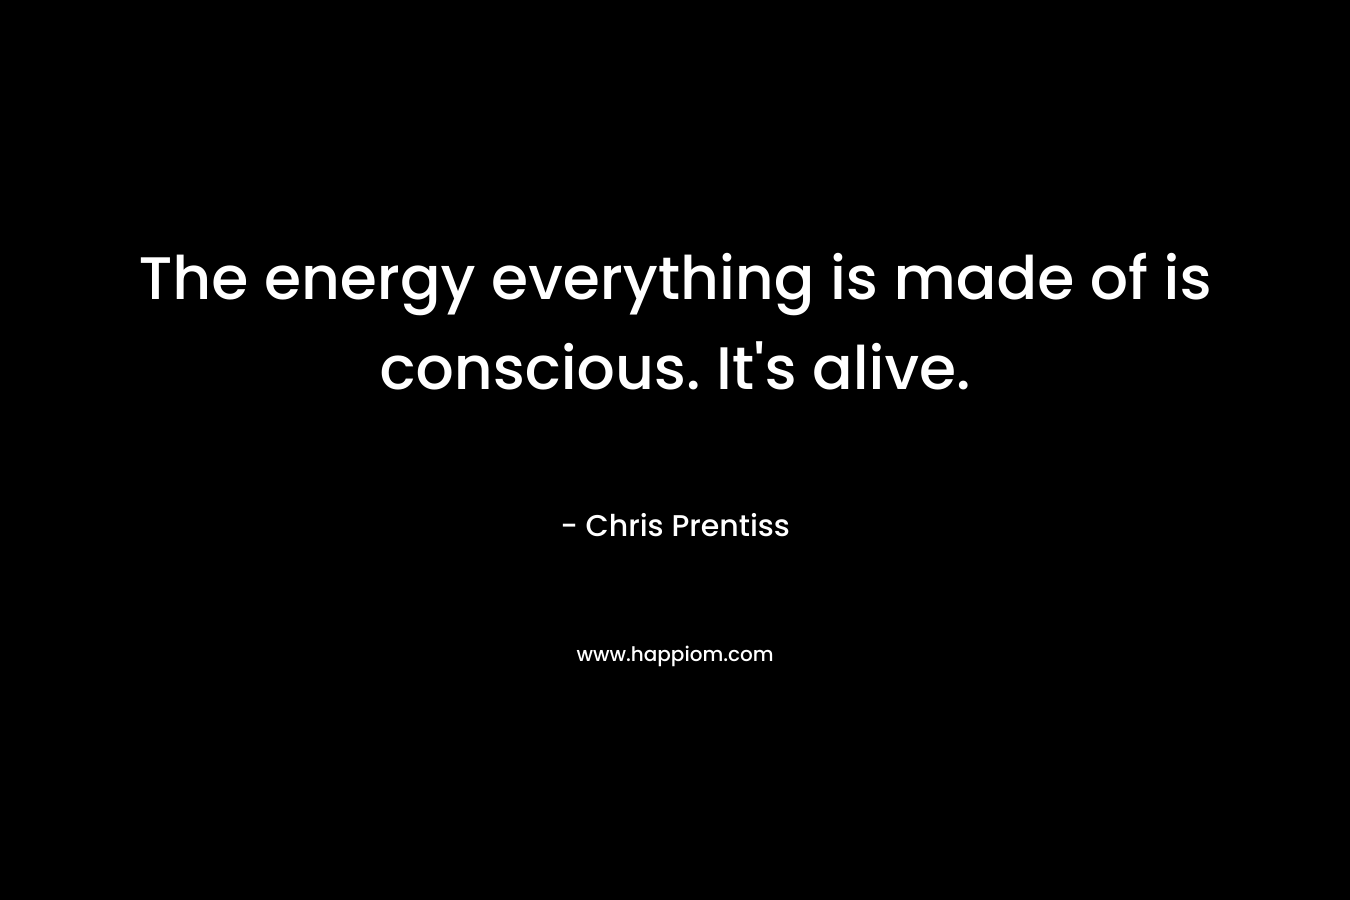 The energy everything is made of is conscious. It's alive.